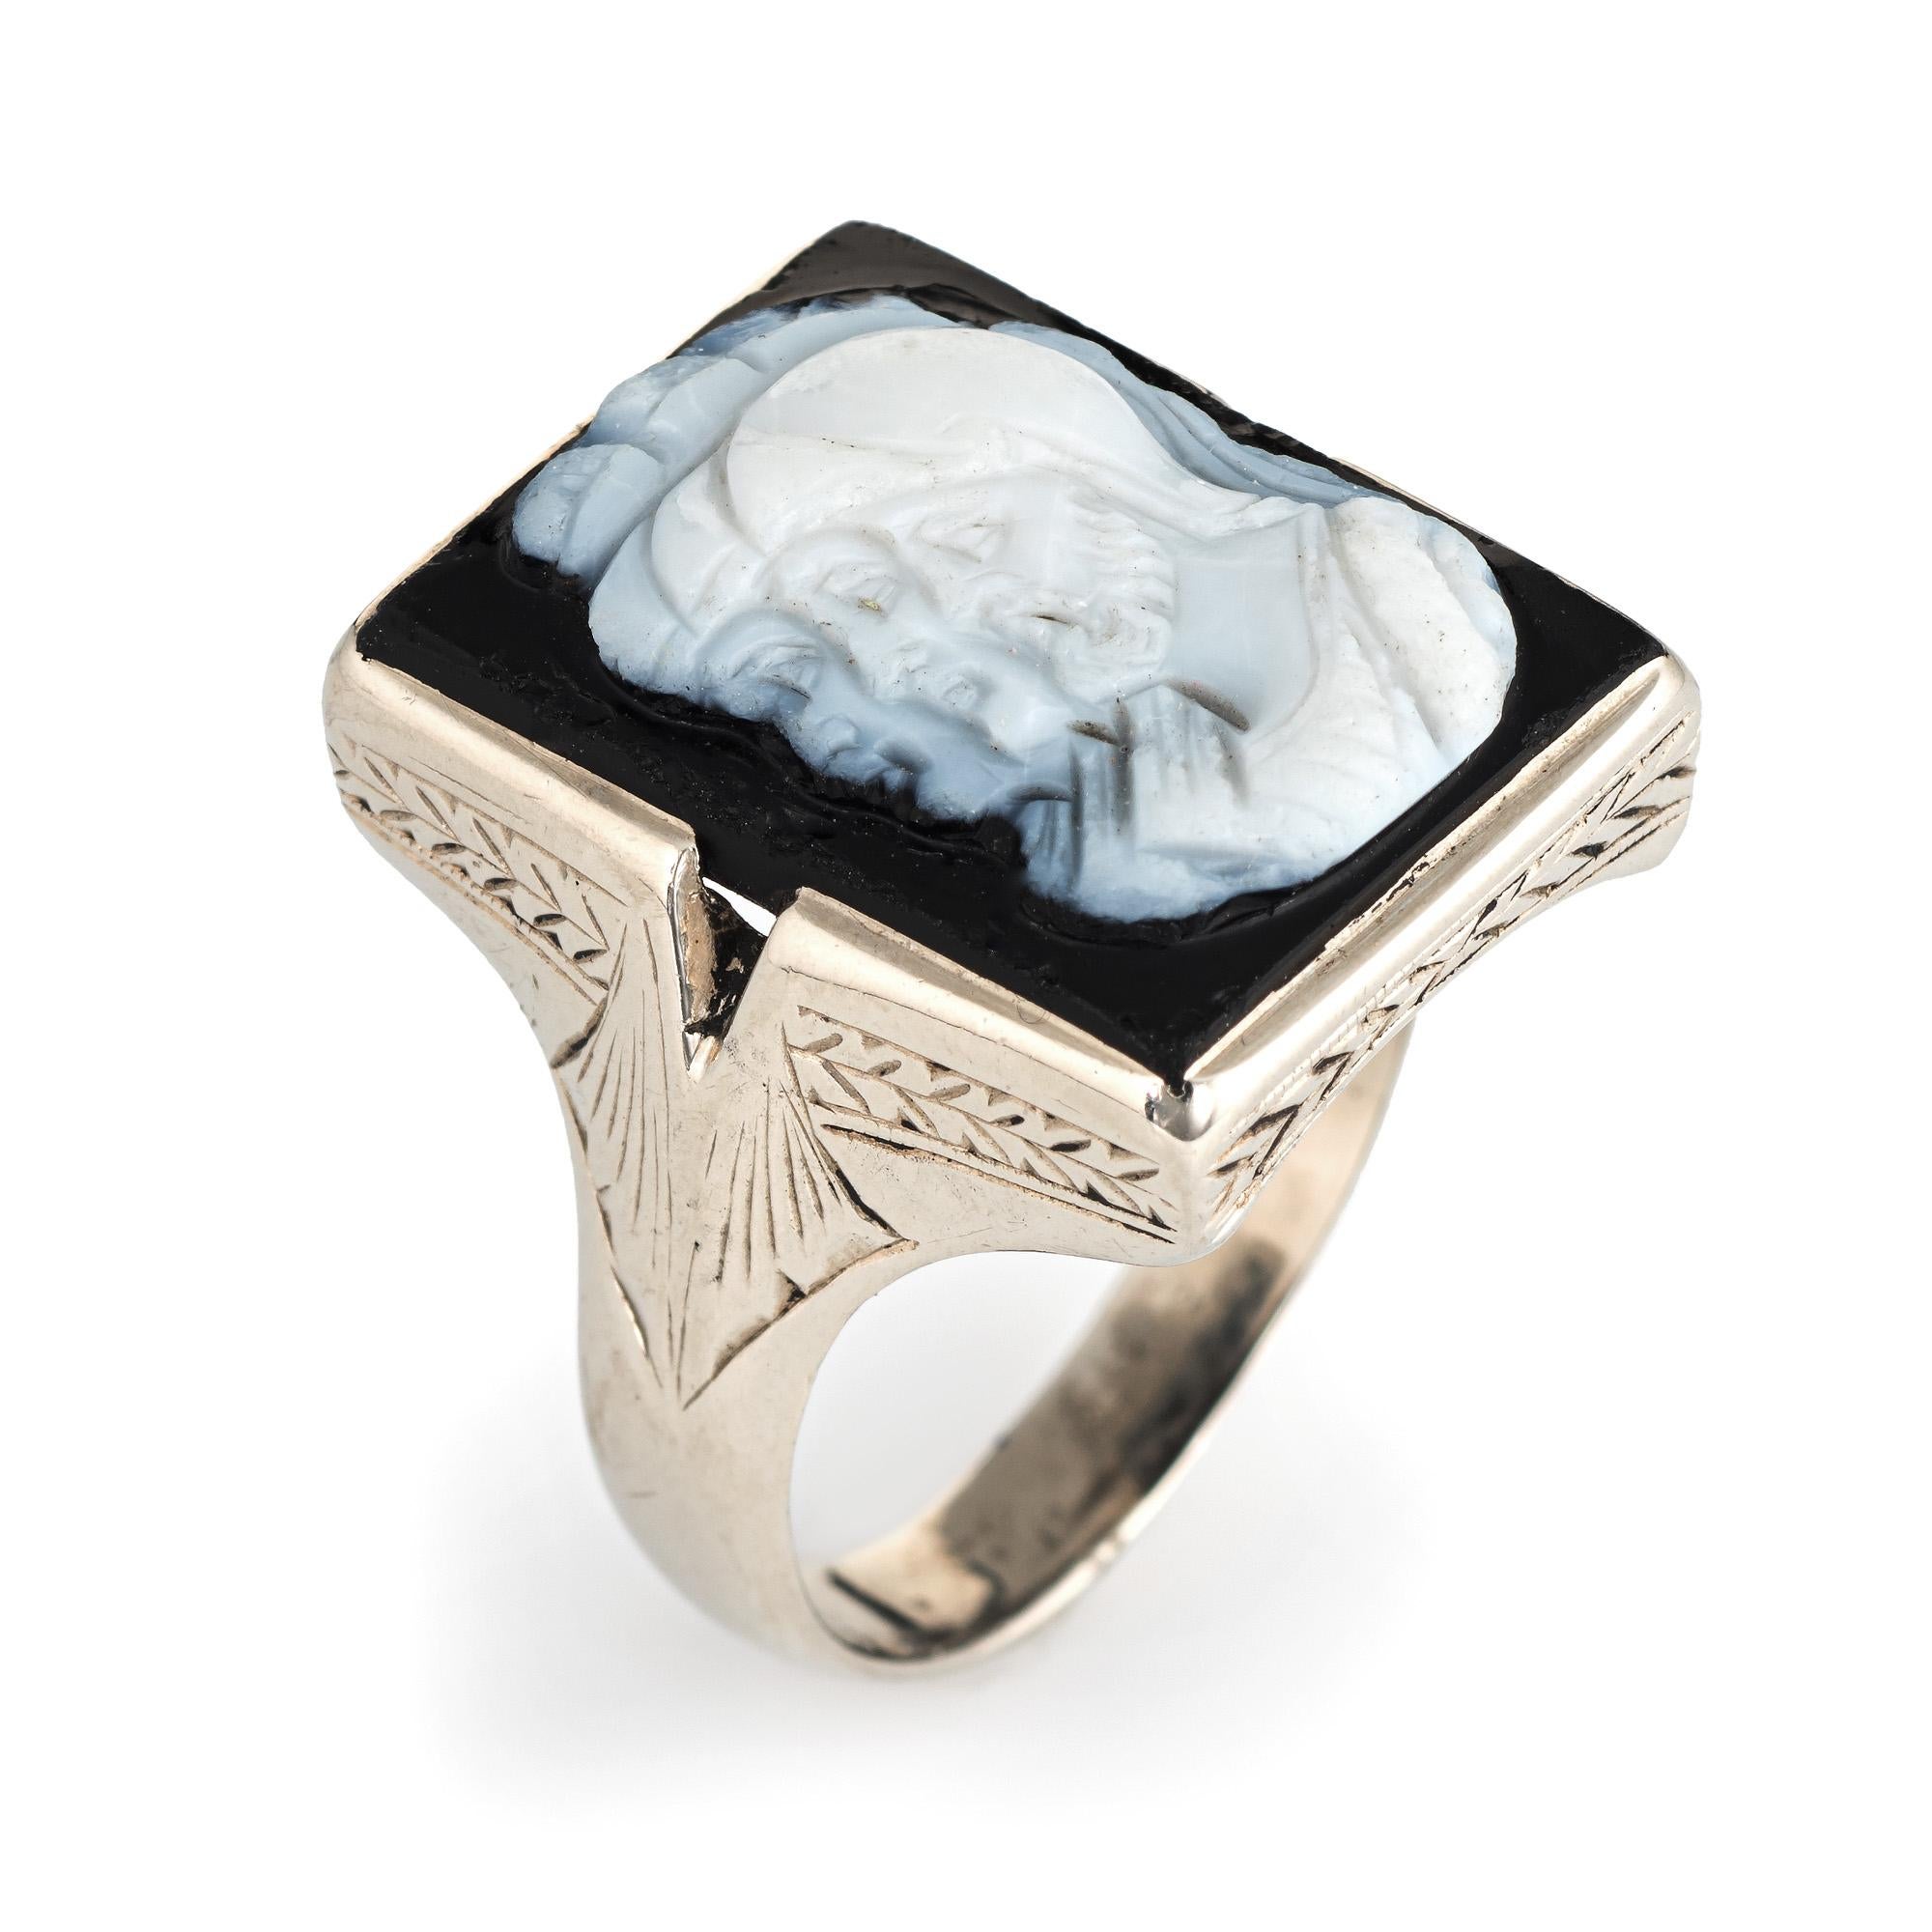 Stylish vintage men's hardstone cameo ring (circa 1920s to 1930s) crafted in 10 karat white gold. 

Sardonyx hardstone cameo measures 20mm x 14mm. The hardstone shows some wear with small chips to the outer edges of the stone (visible under a 10x